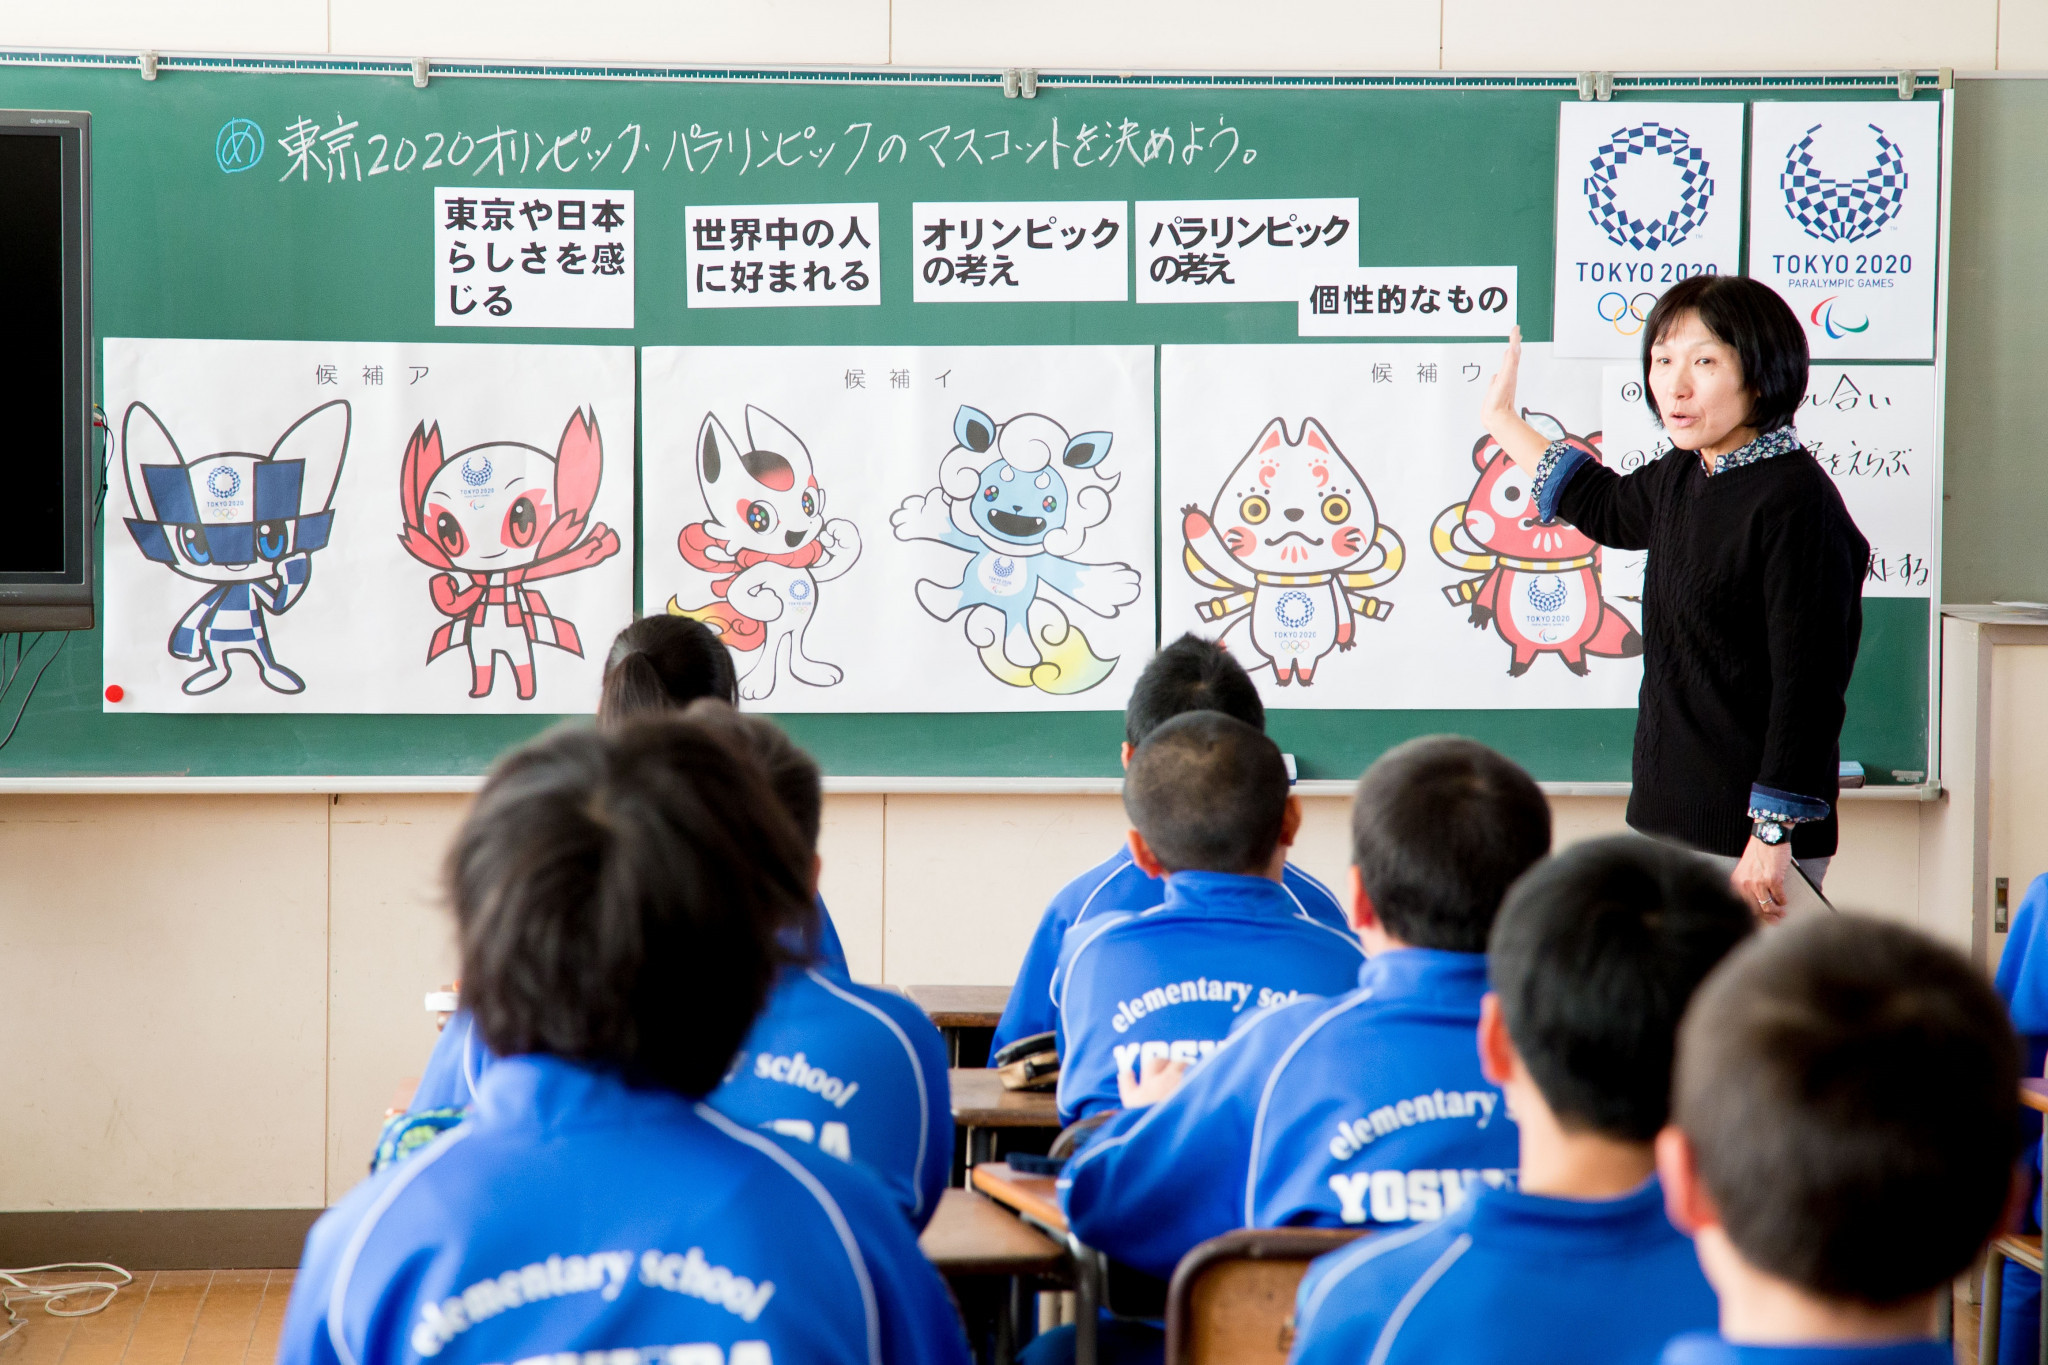 Lesson plans have been sent to schools which they can use to explain the role of mascots, as well as the Olympic and Paralympic values ©Tokyo 2020